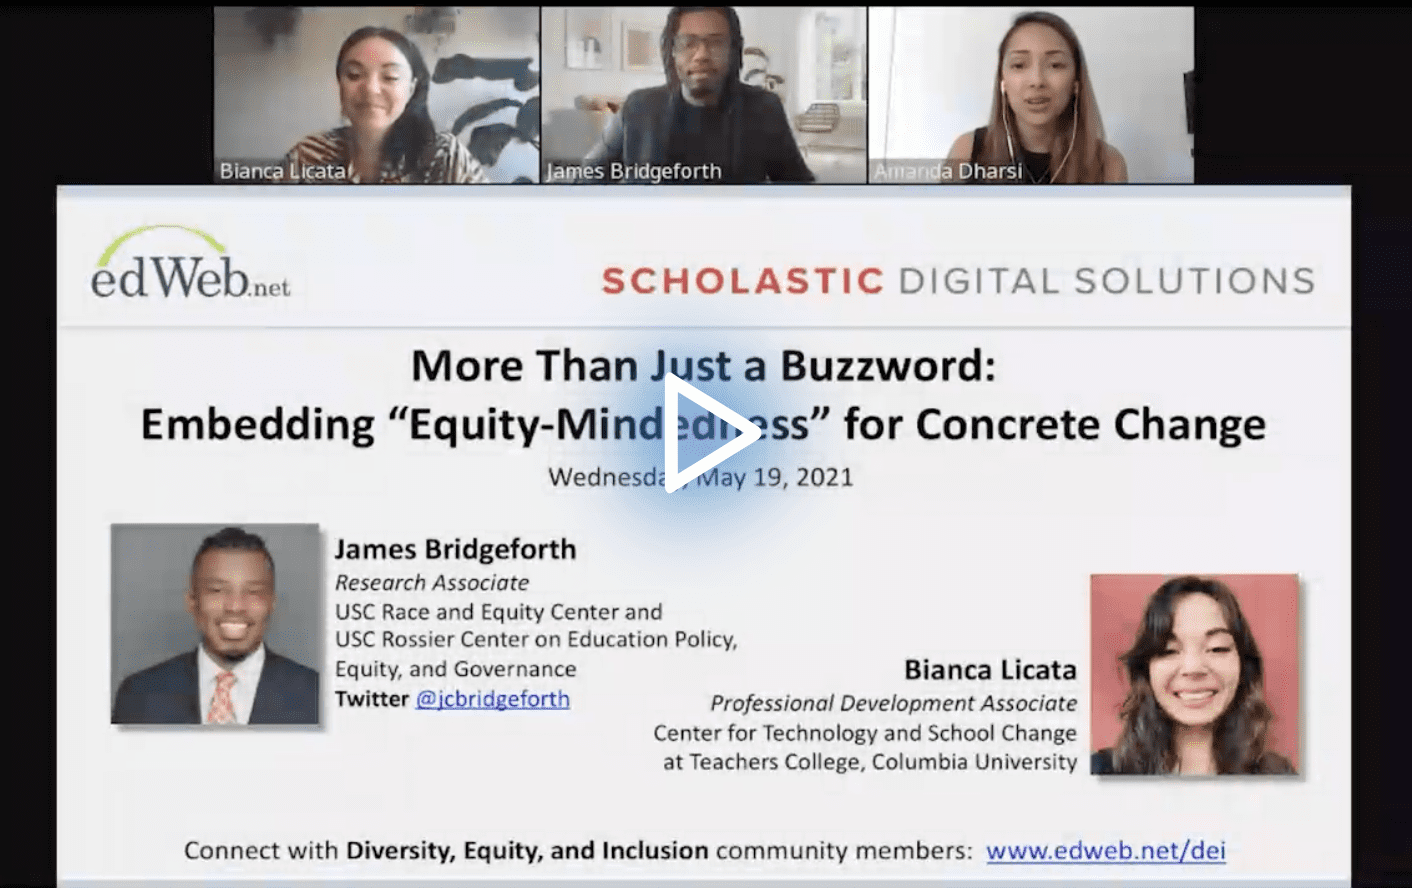 More Than Just a Buzzword: Embedding “Equity-Mindedness” for Concrete Change edWebinar recording link